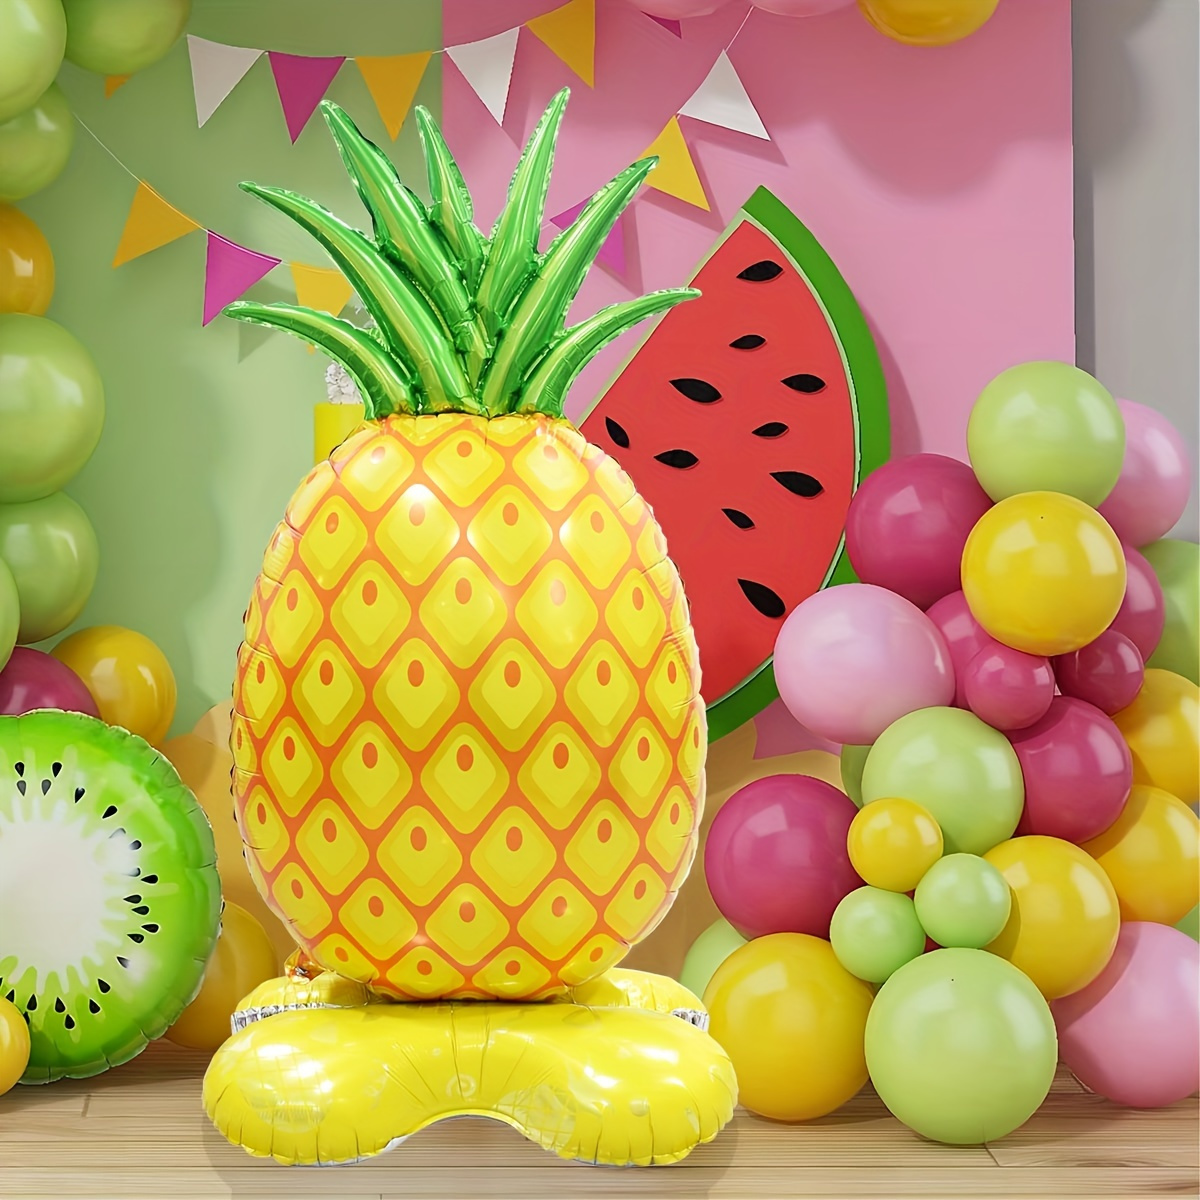 

Giant 61-inch Pineapple Shaped Aluminum Foil Balloon With Stand Base For Summer Beach Birthday Party And Hawaiian Theme Party Supplies, Ideal For Hawaiian Wedding Decoration - 1 Piece